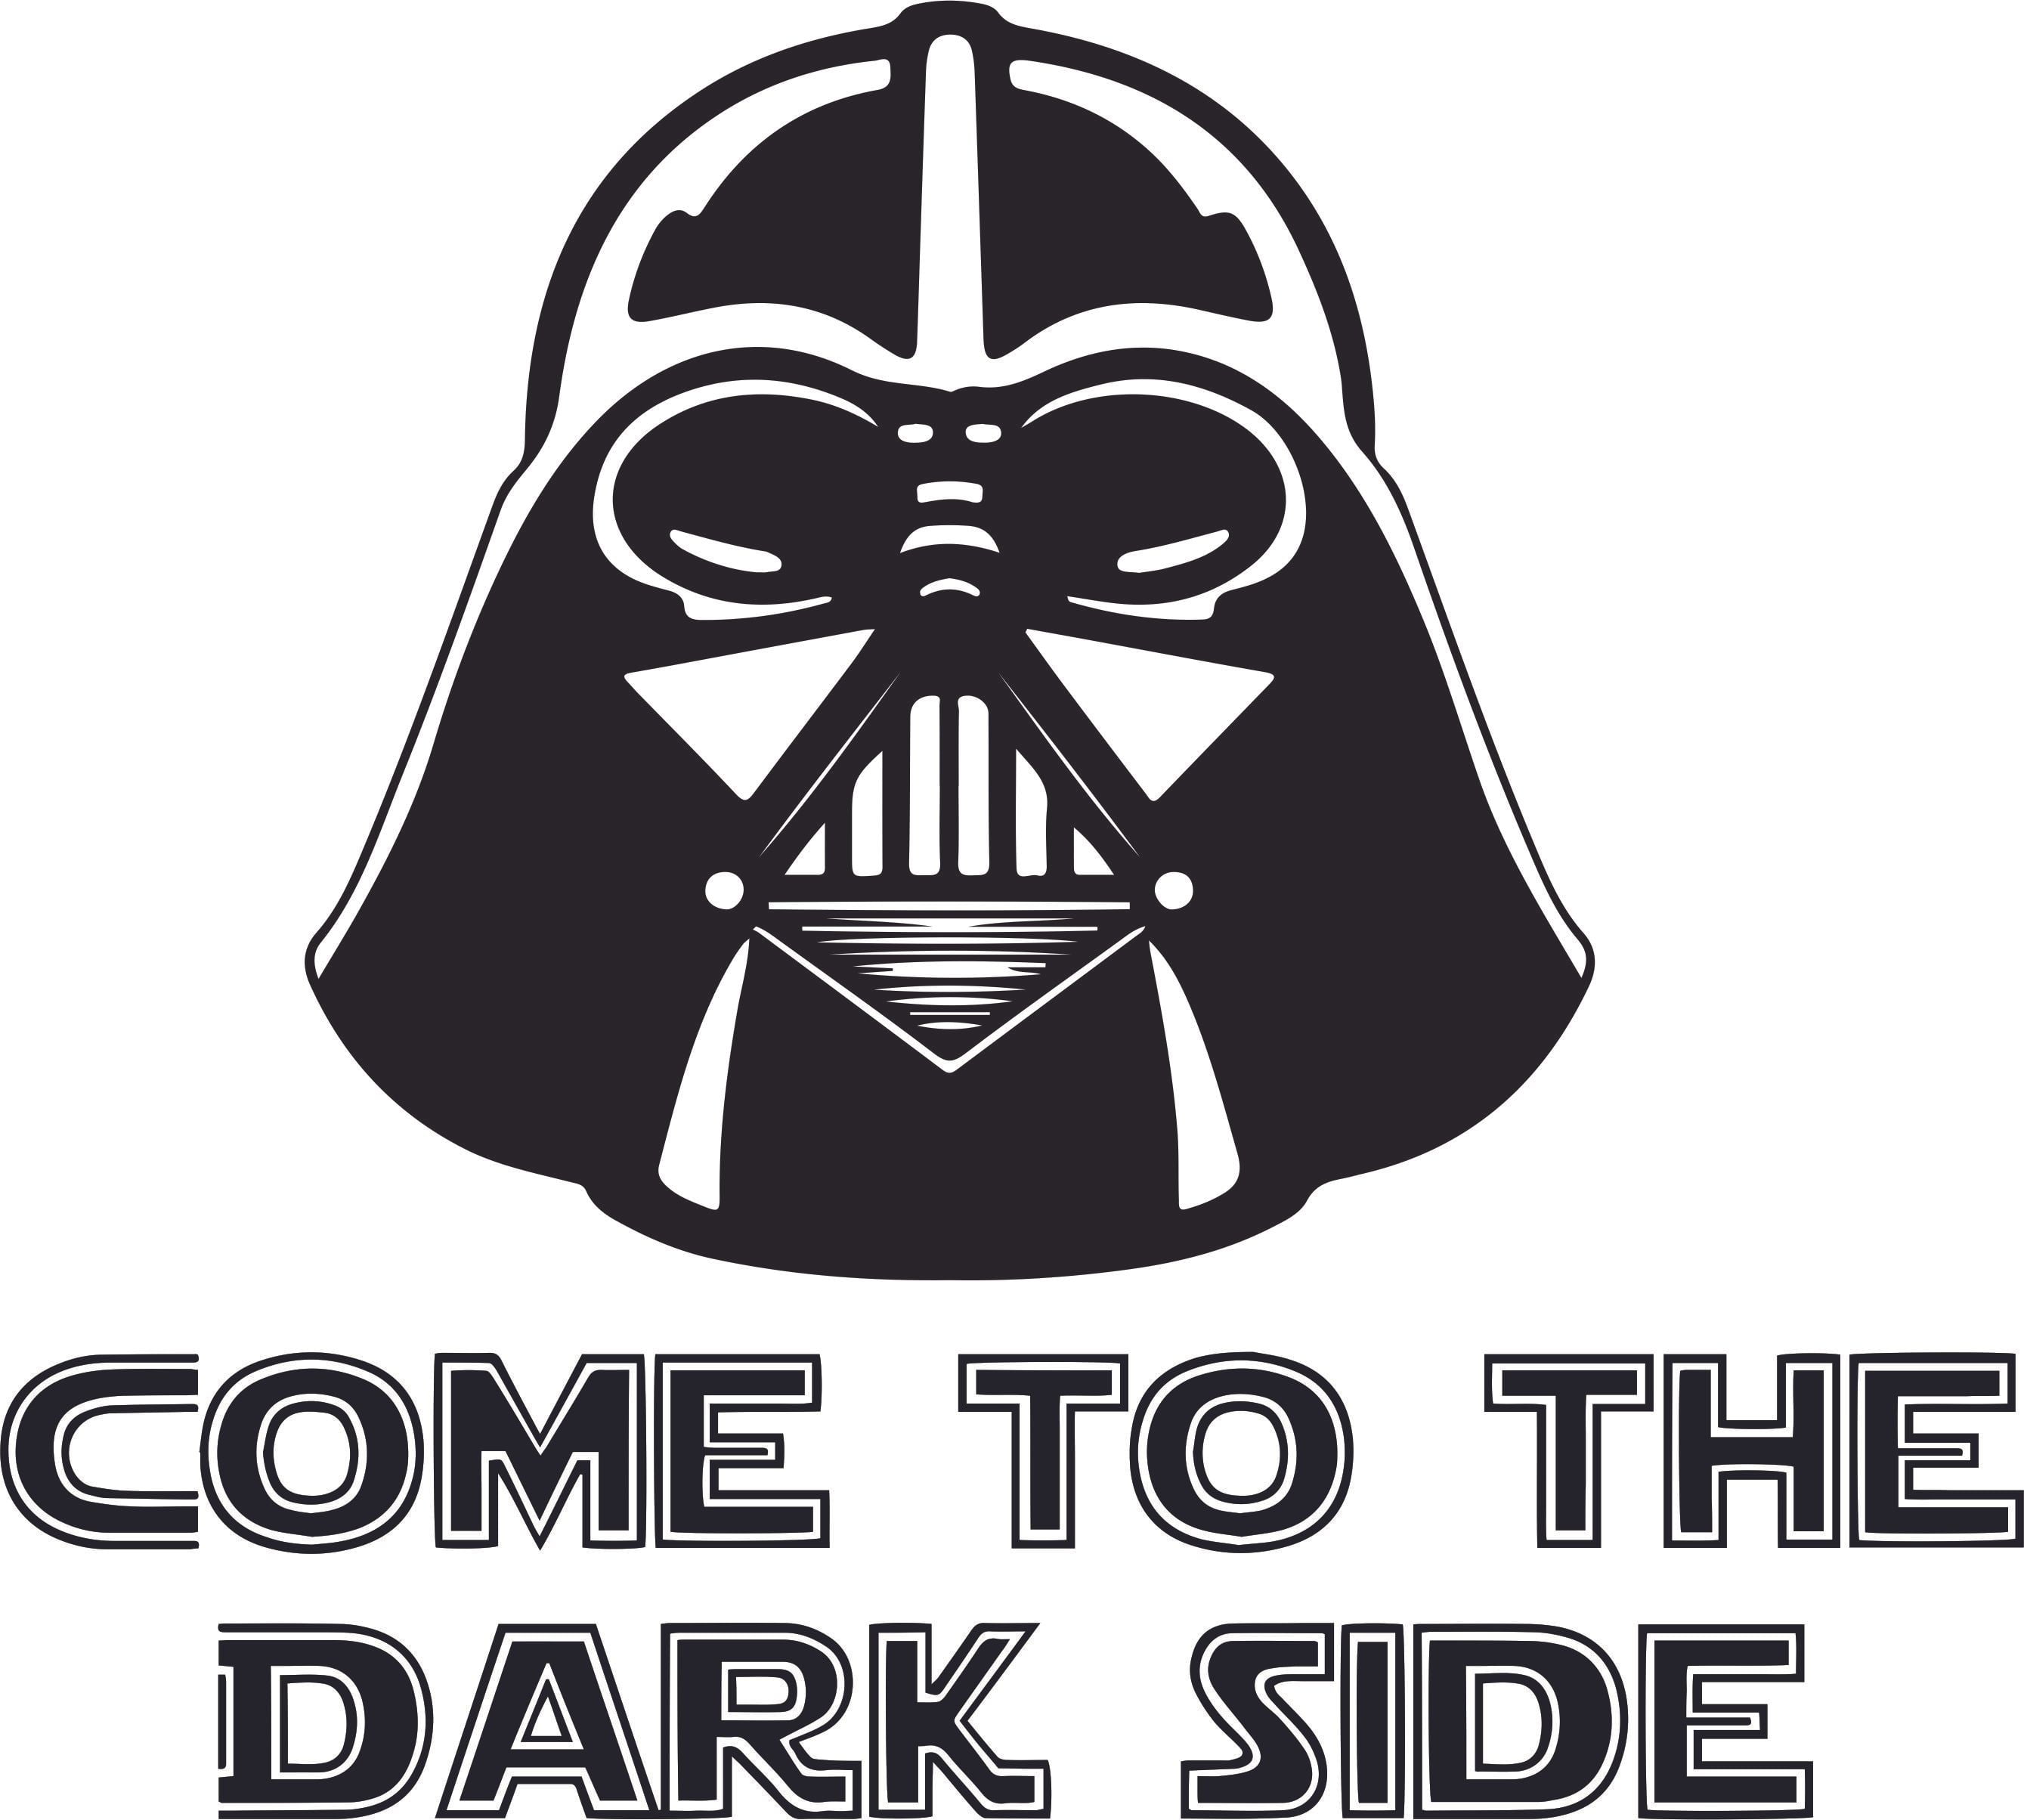 Darth Vader Powered By The Darkside Decals Funny Star Wars Stickers Sith 